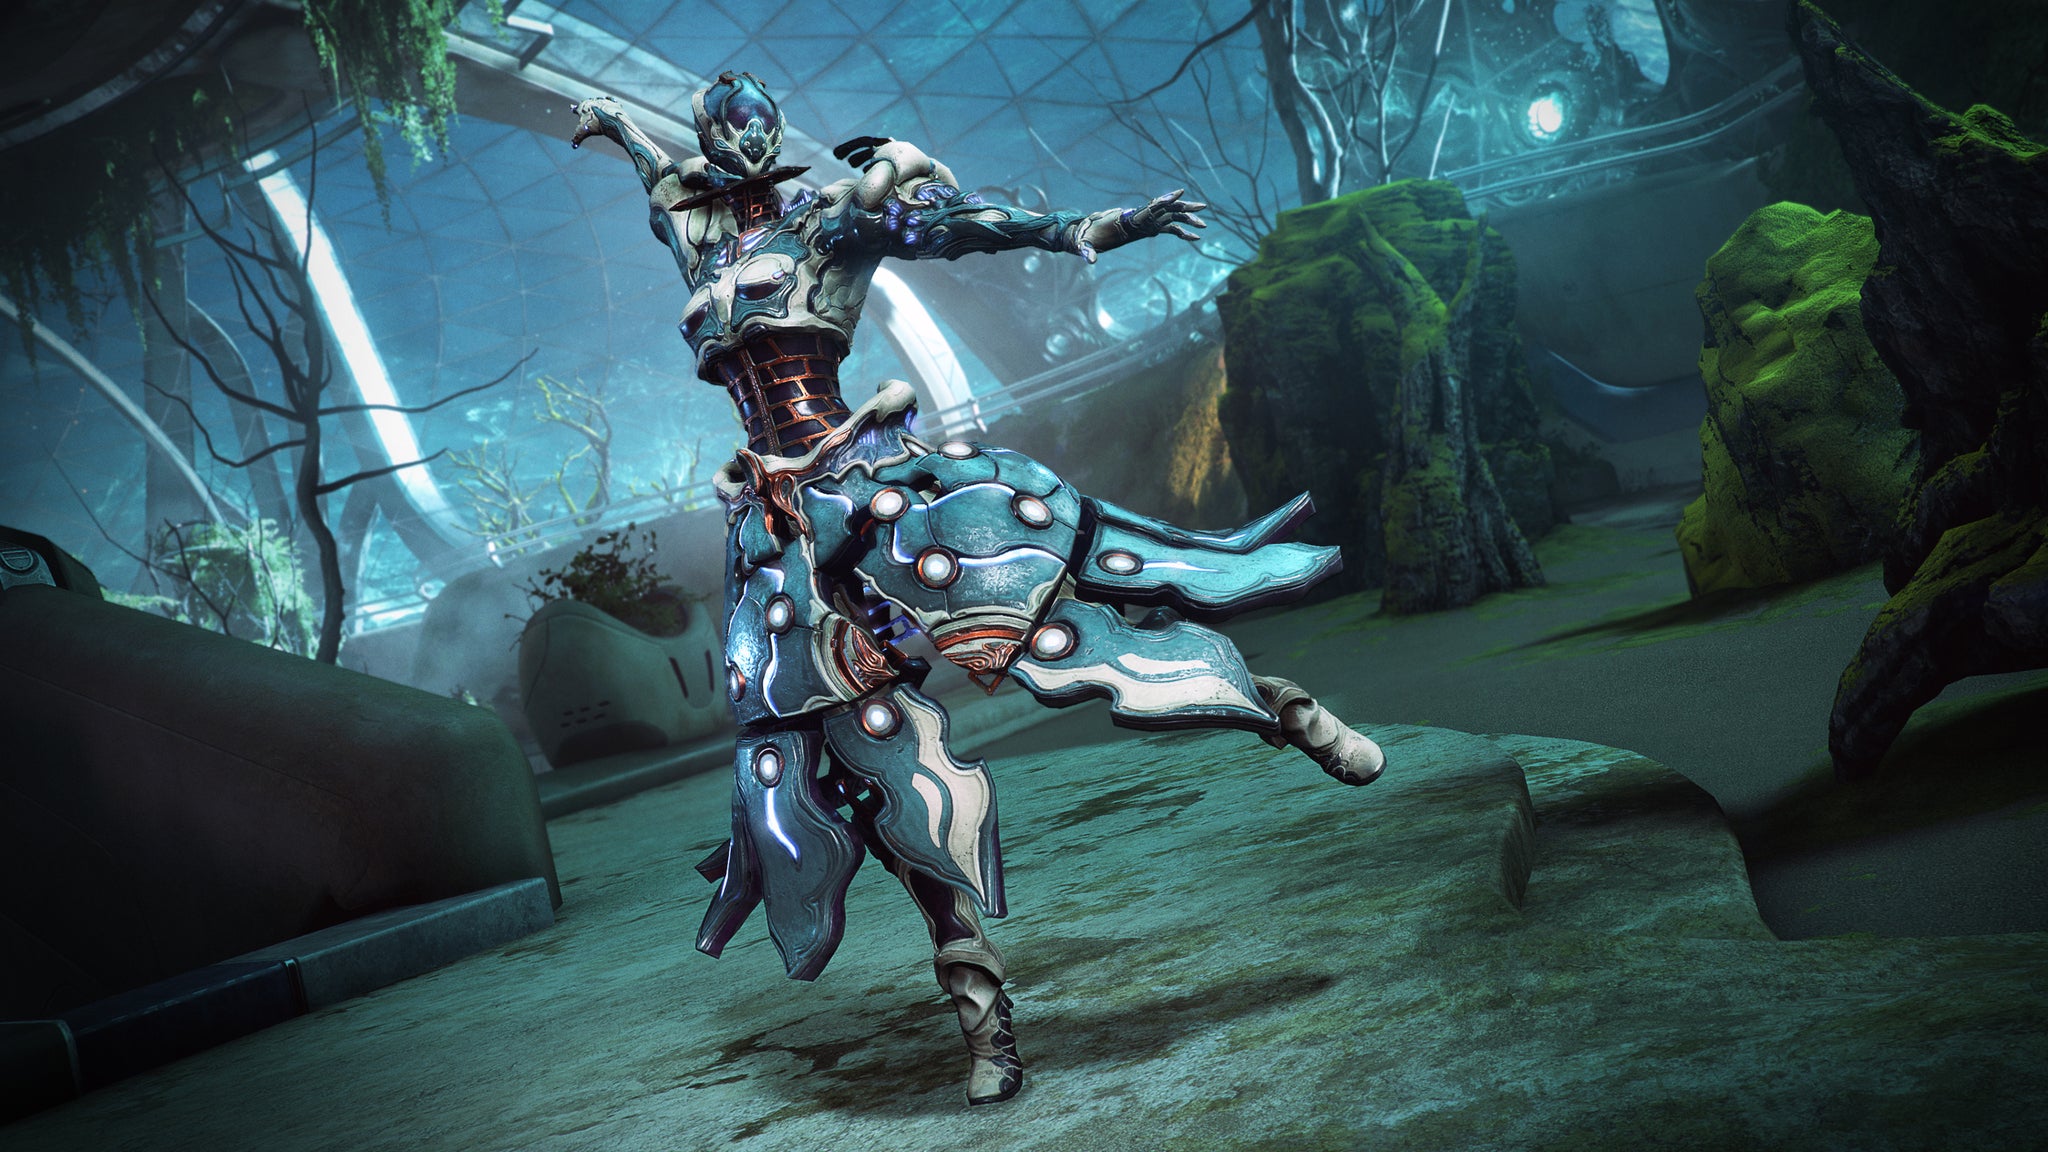 The new Warframe, Gyre, who uses electricity and smooth movements to take out enemies